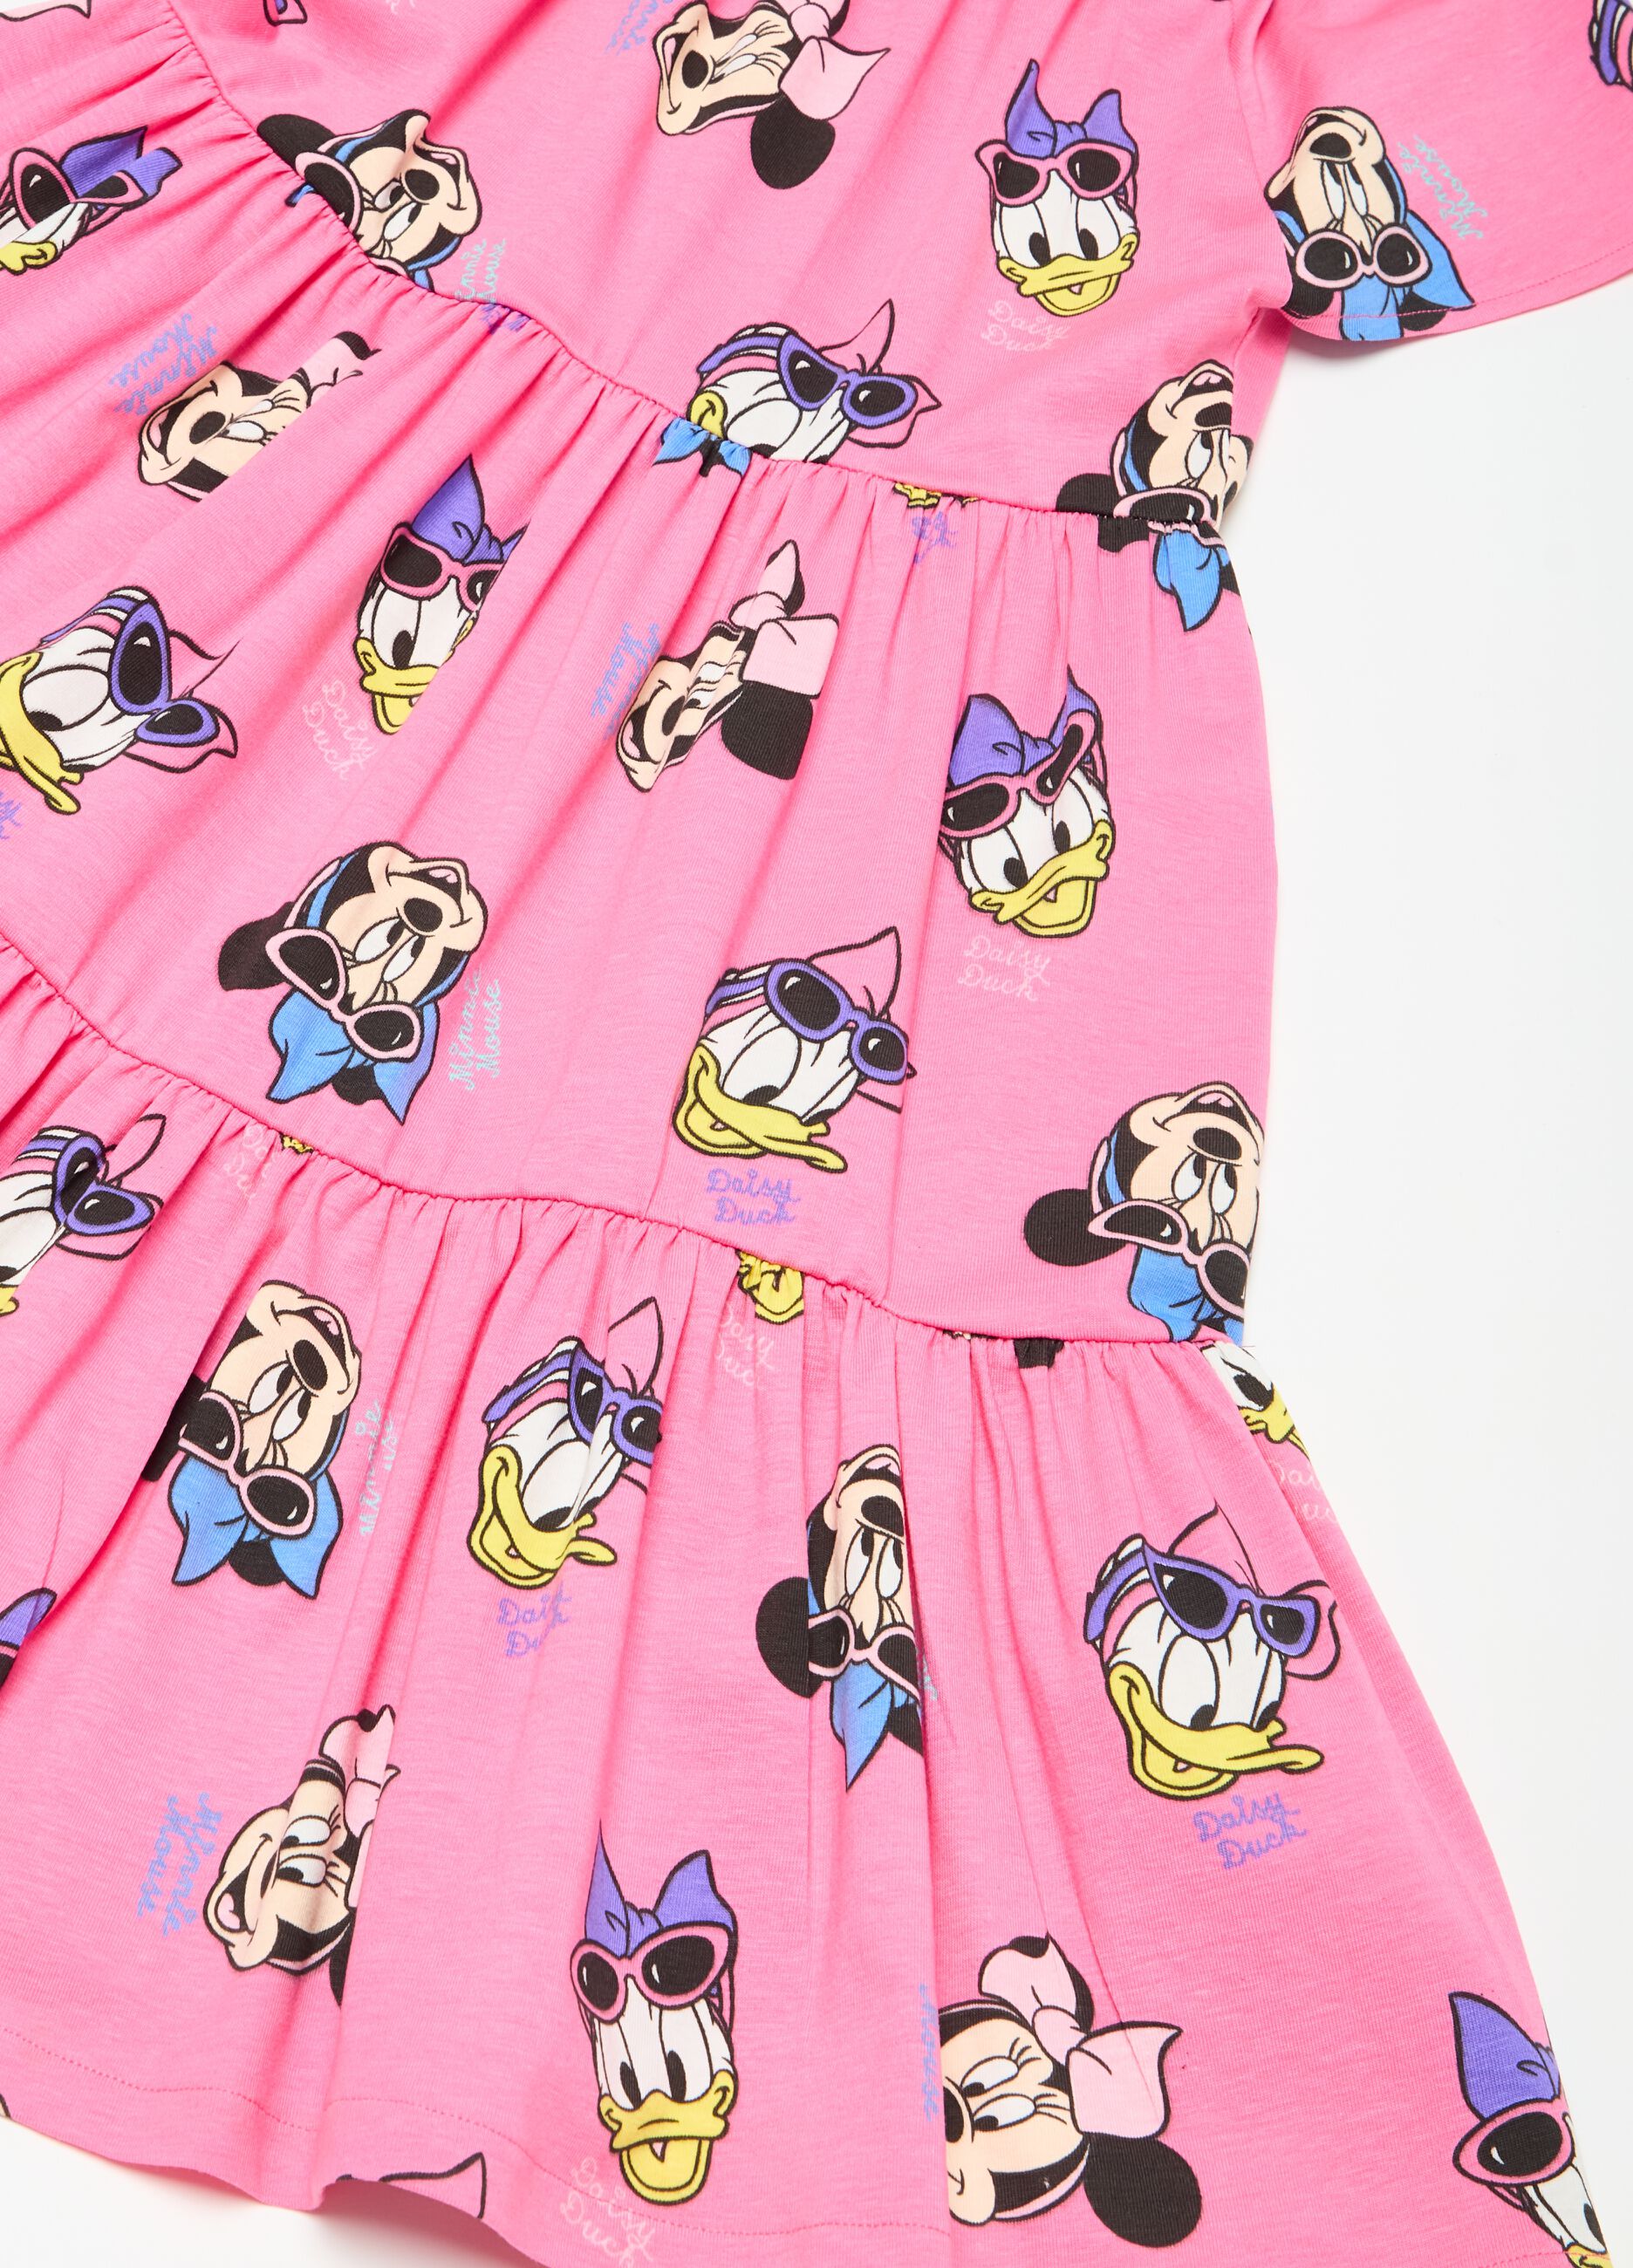 Tiered dress with Minnie Mouse and Daisy Duck print